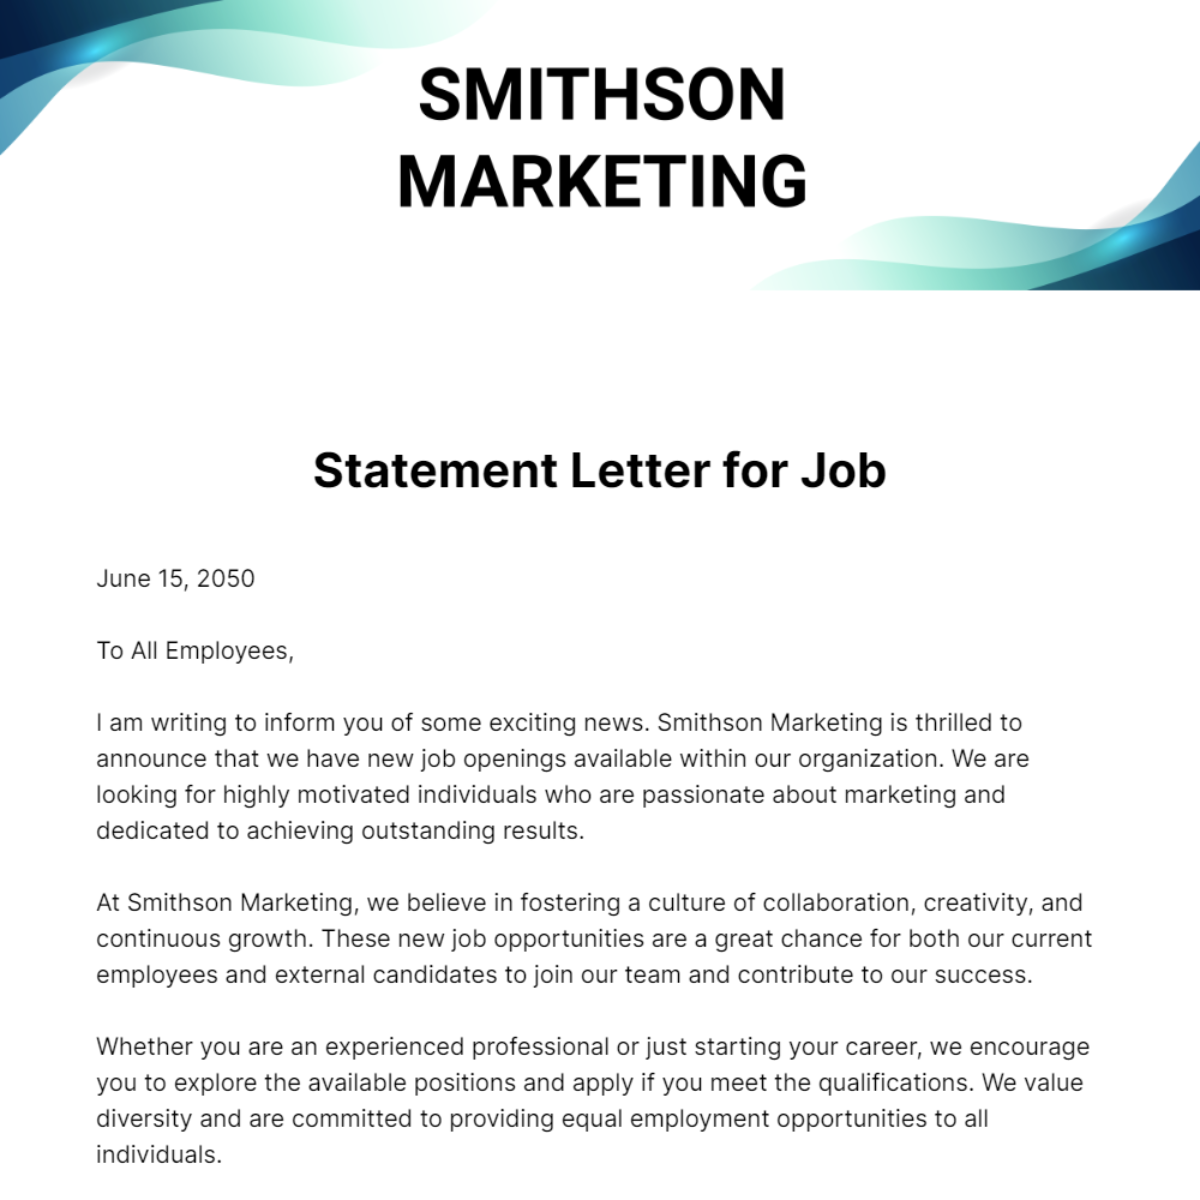 Free Statement Letter for Job Template